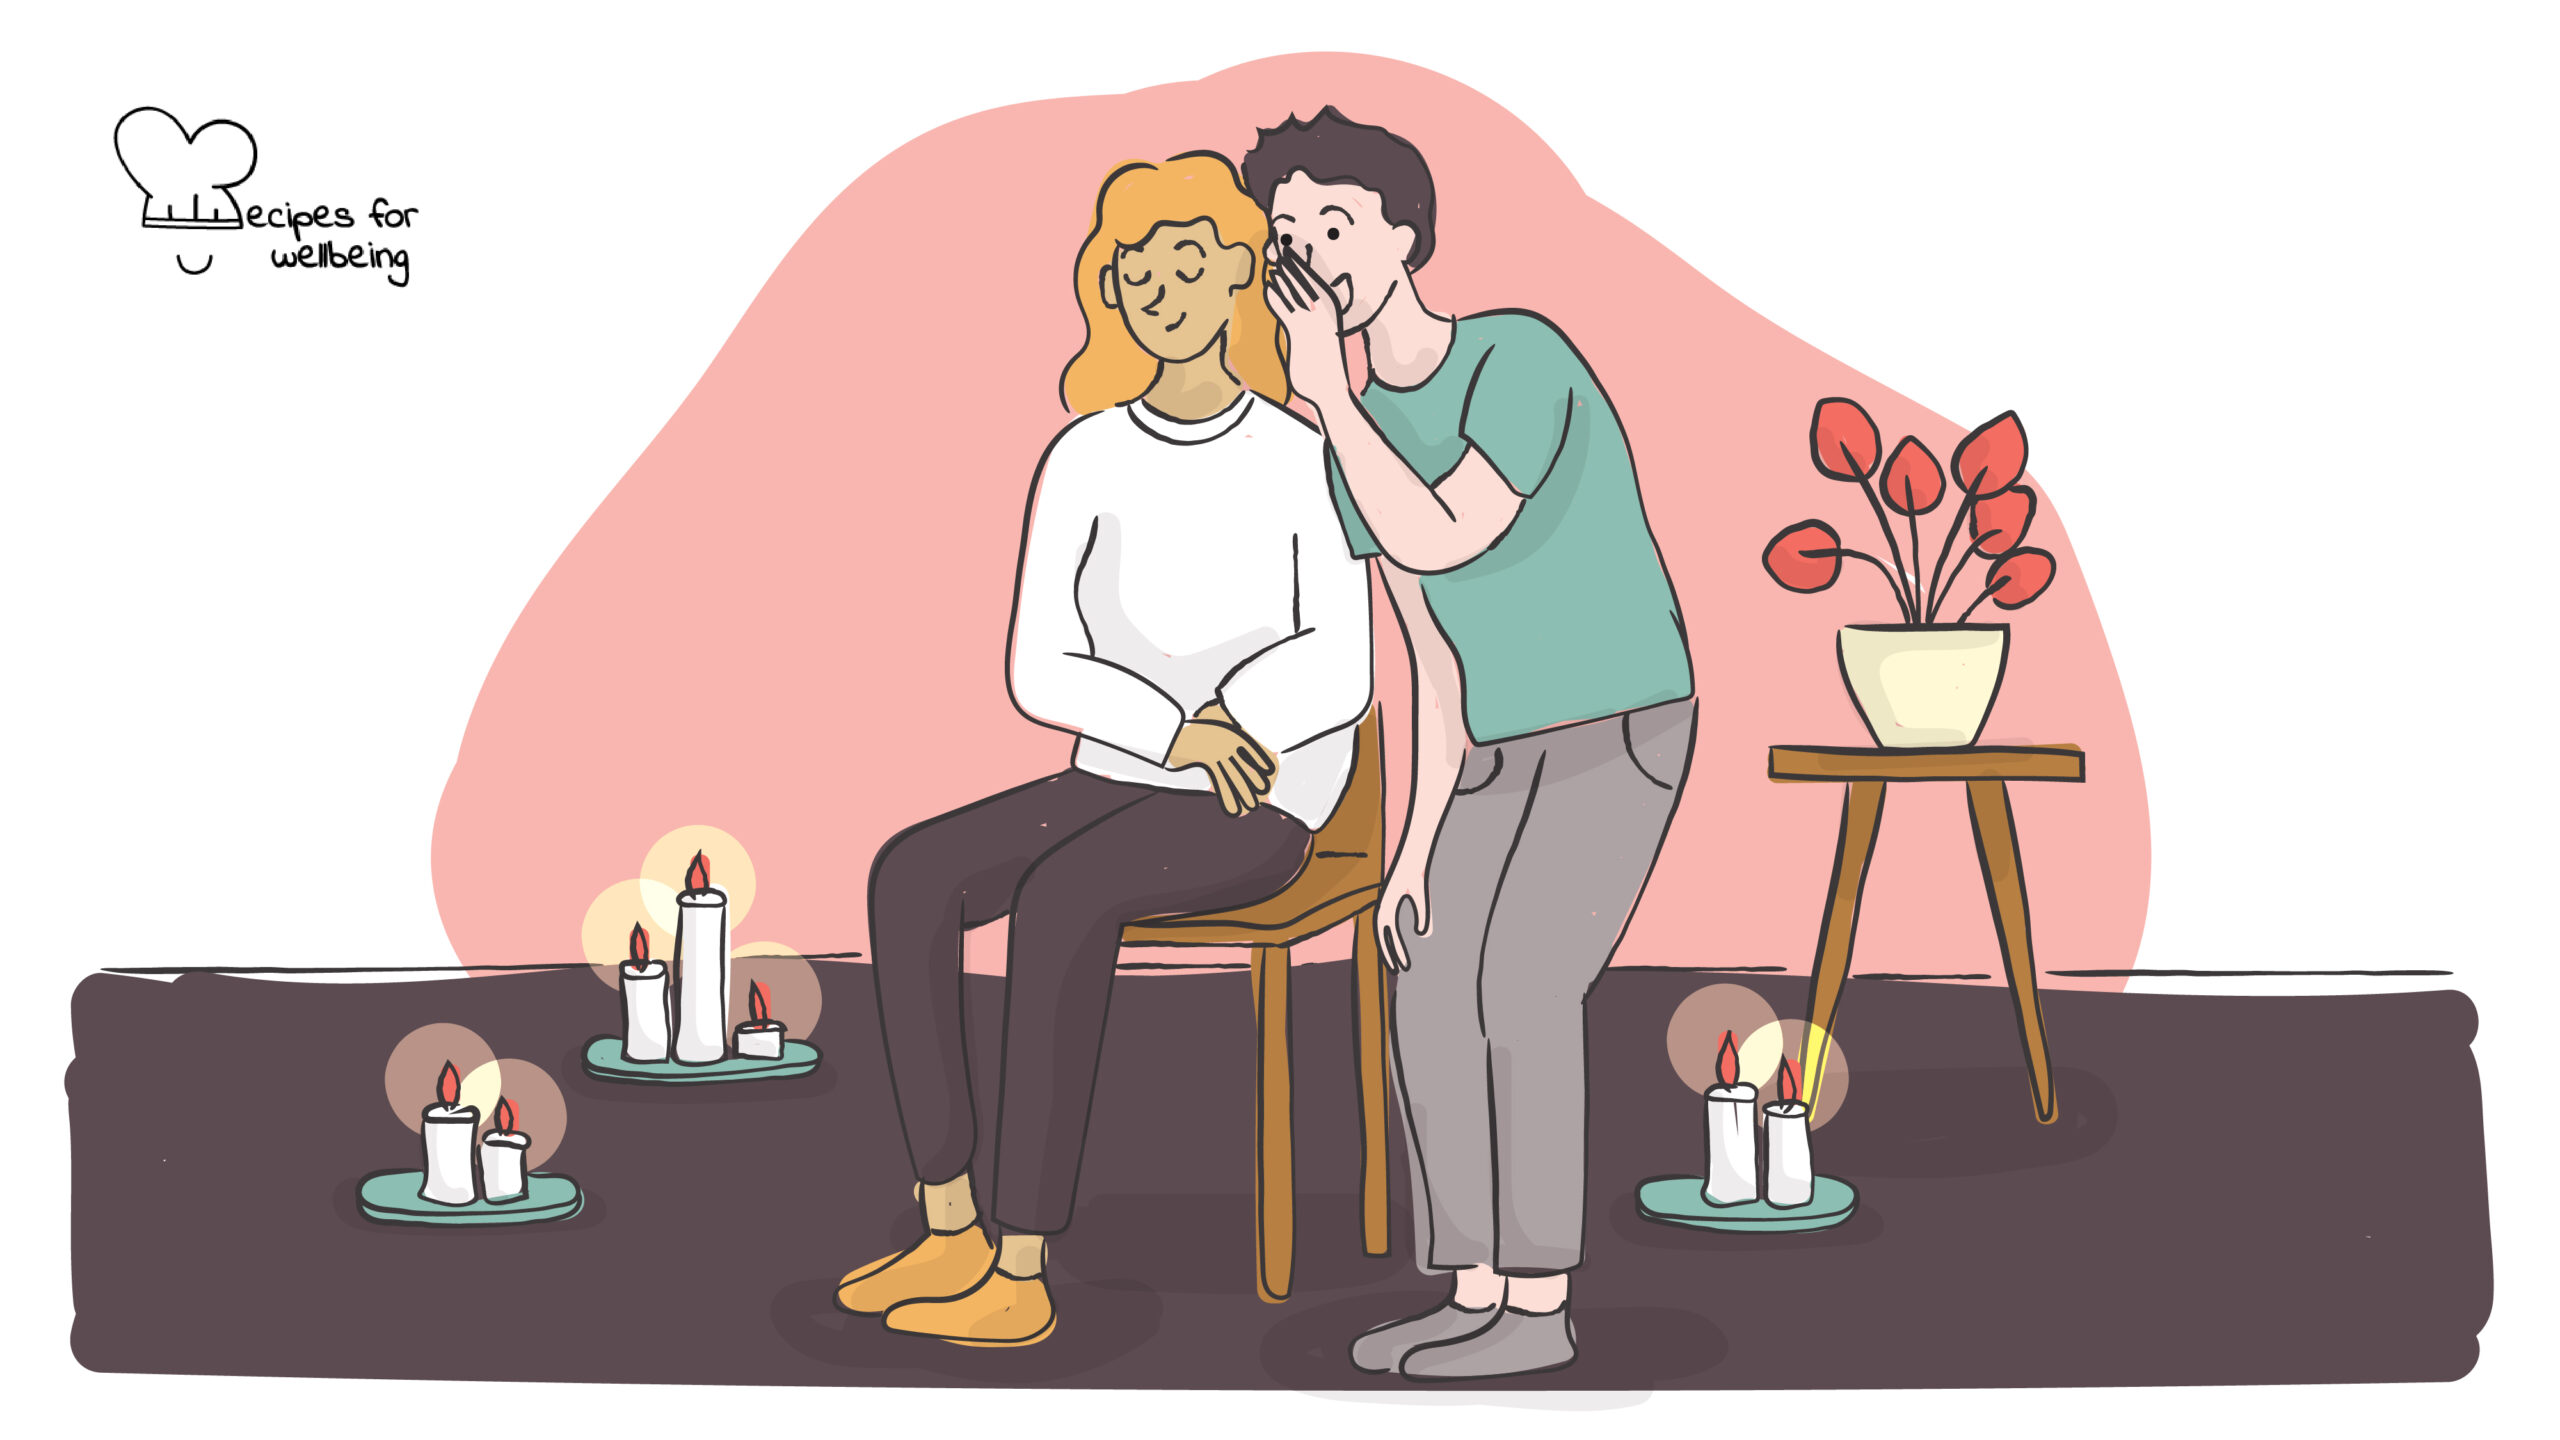 Illustration of a person sitting on a chair with closed eyes and another one standing behind them whispering something in their ear. © Recipes for Wellbeing